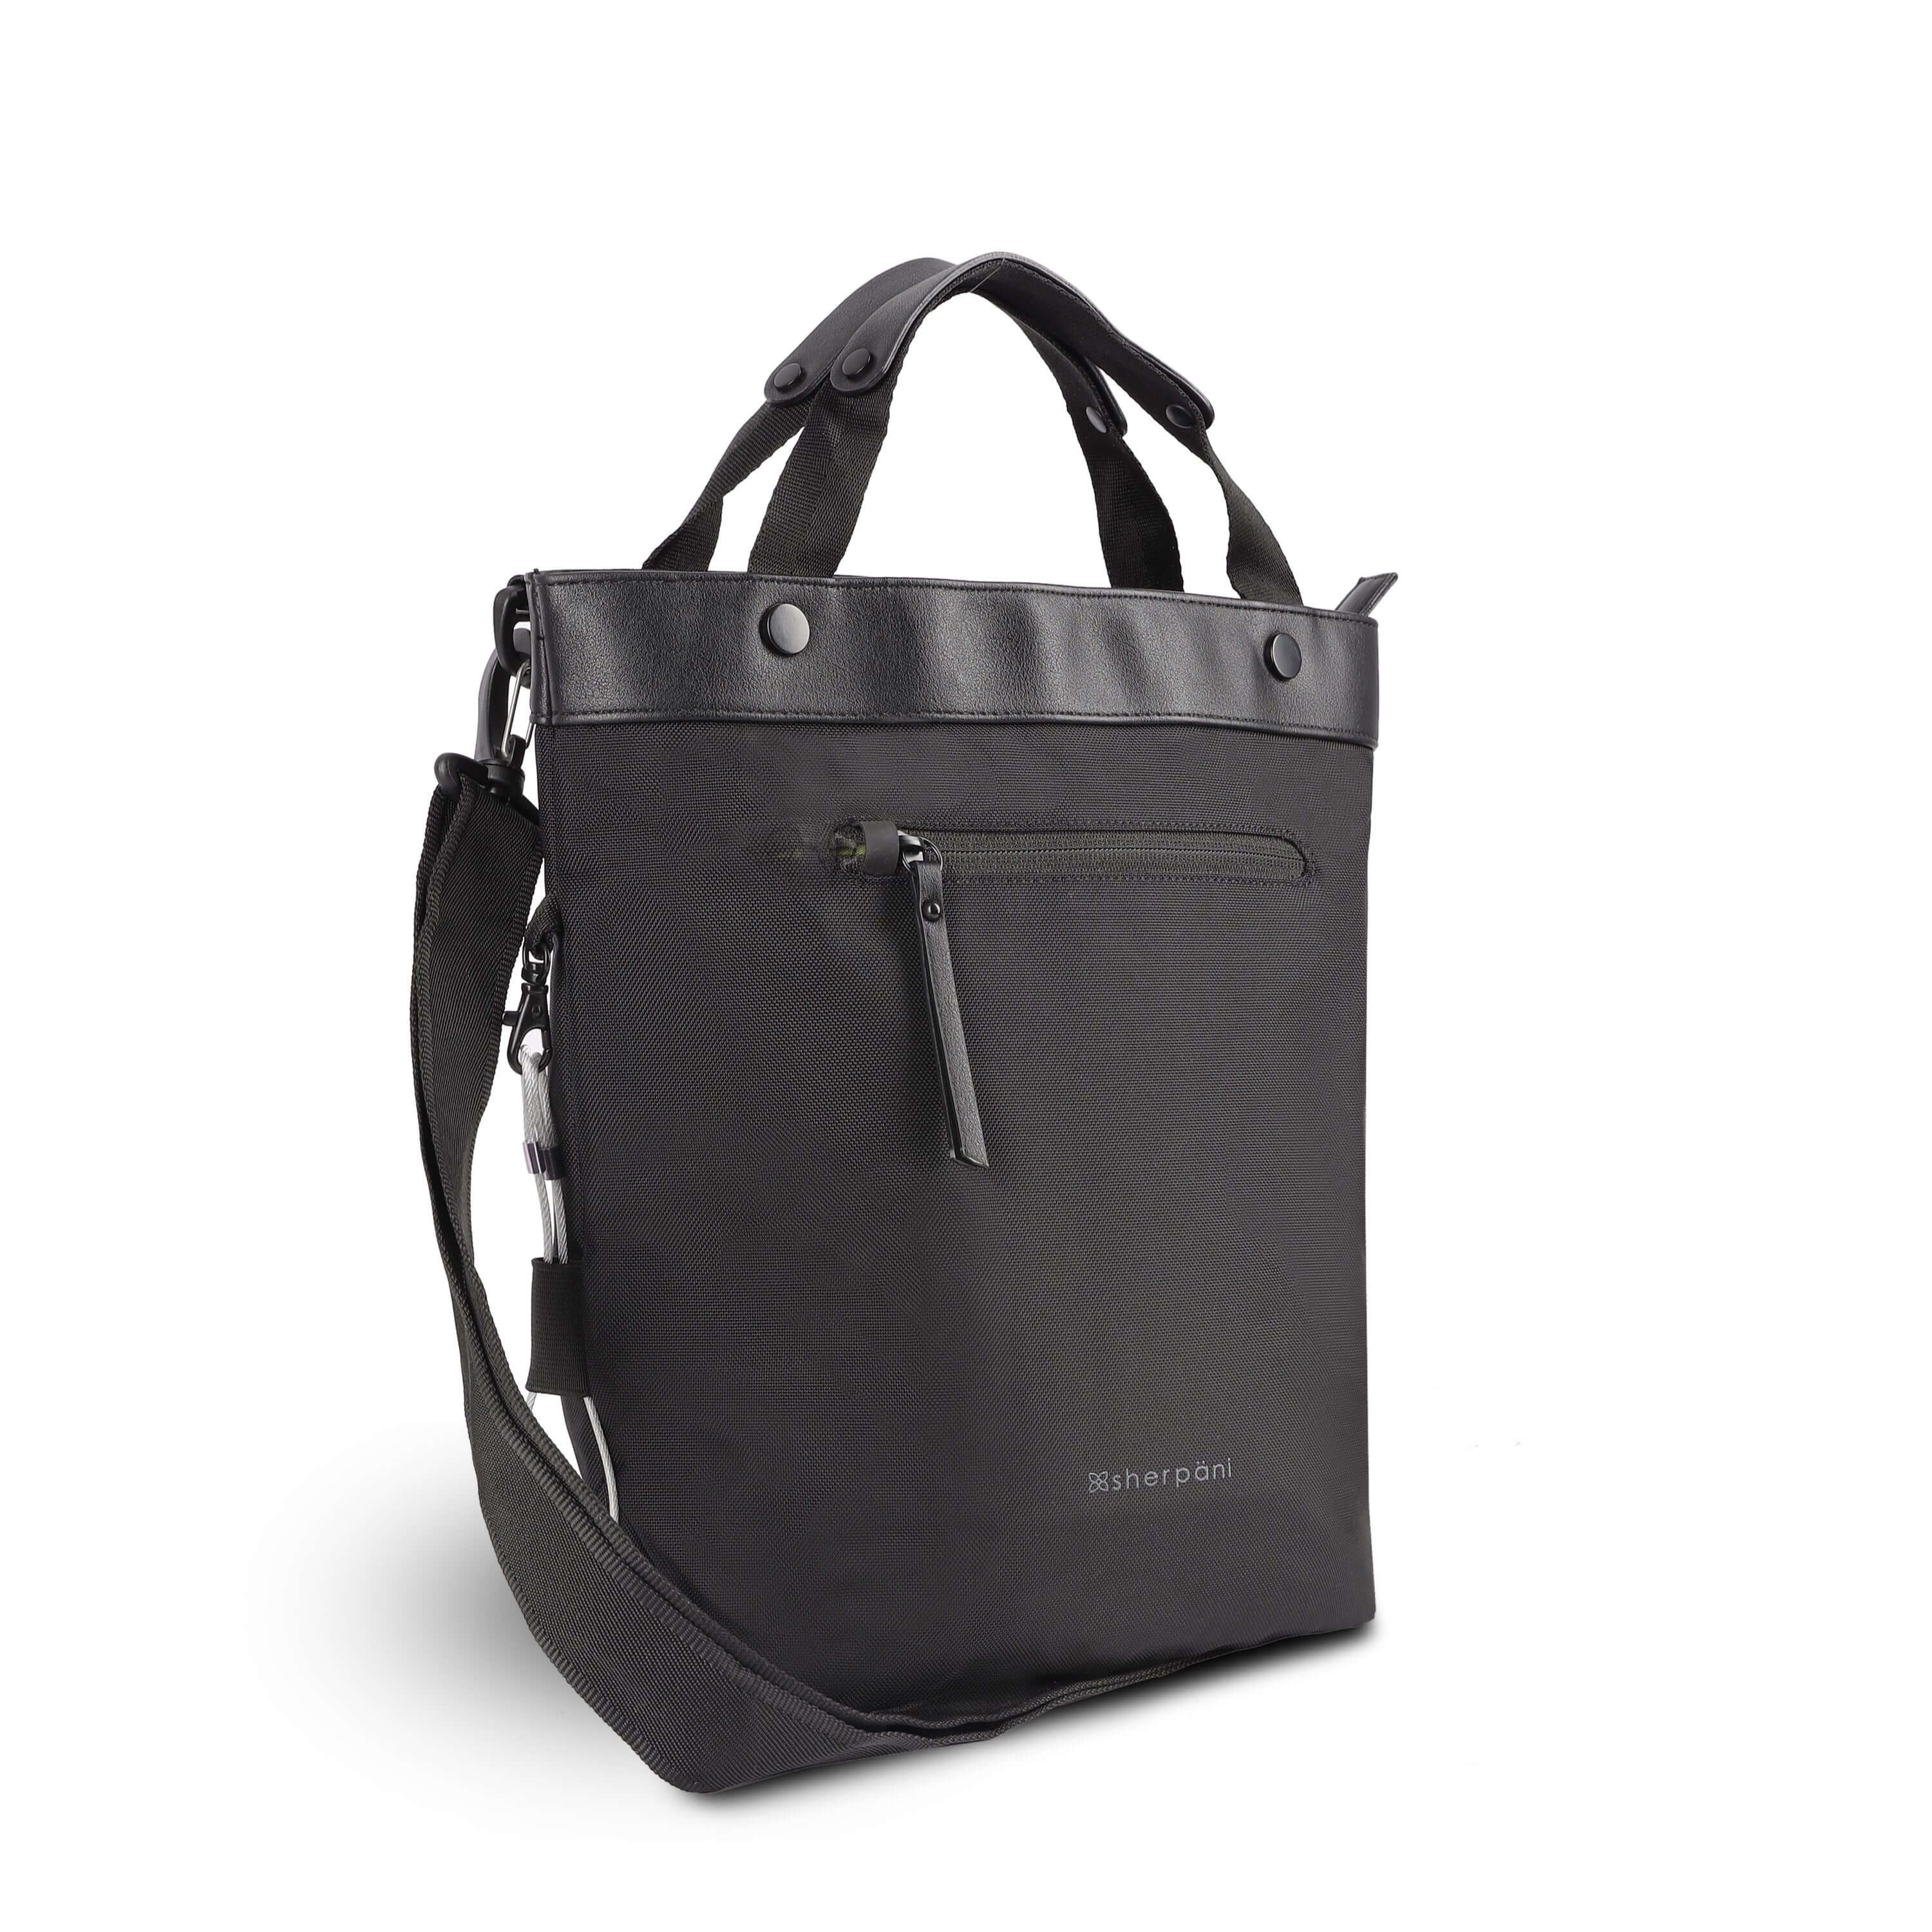 Angled front view of Sherpani's Anti-Theft bag, the Geo AT in Carbon, with vegan leather accents in black. The bag features short tote handles and an adjustable/detachable crossbody strap. There is a locking zipper compartment on the front. A chair loop lock is clipped to the side and secured in place by an elastic tab.